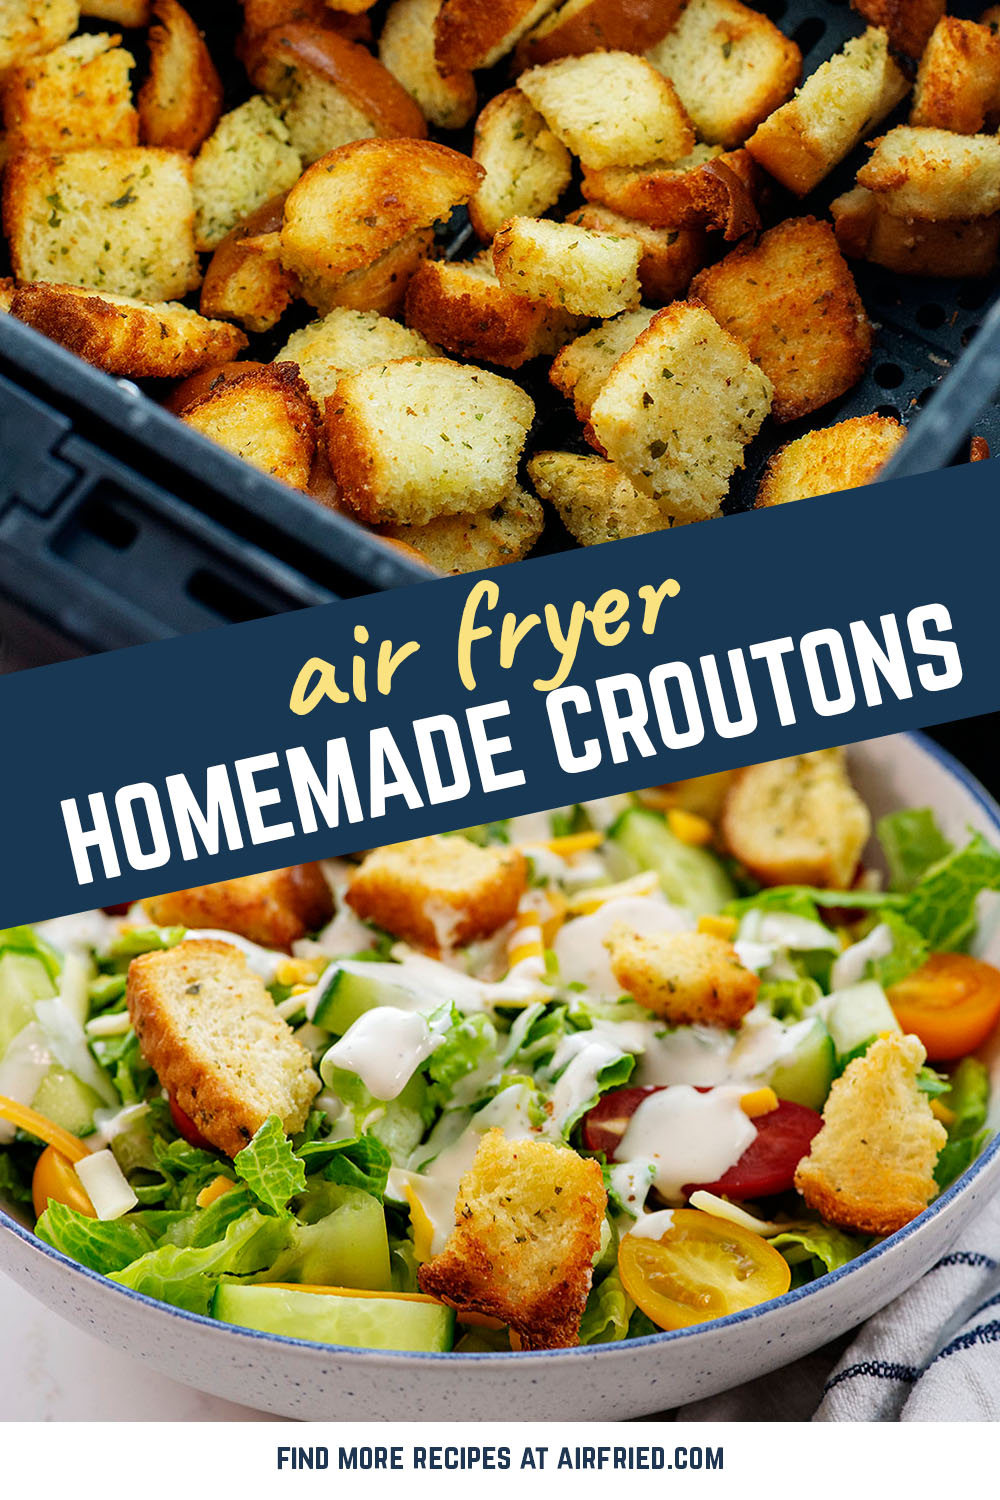 These homemade croutons are super easy to make in the air fryer!  The take a good salad and make it wonderful!